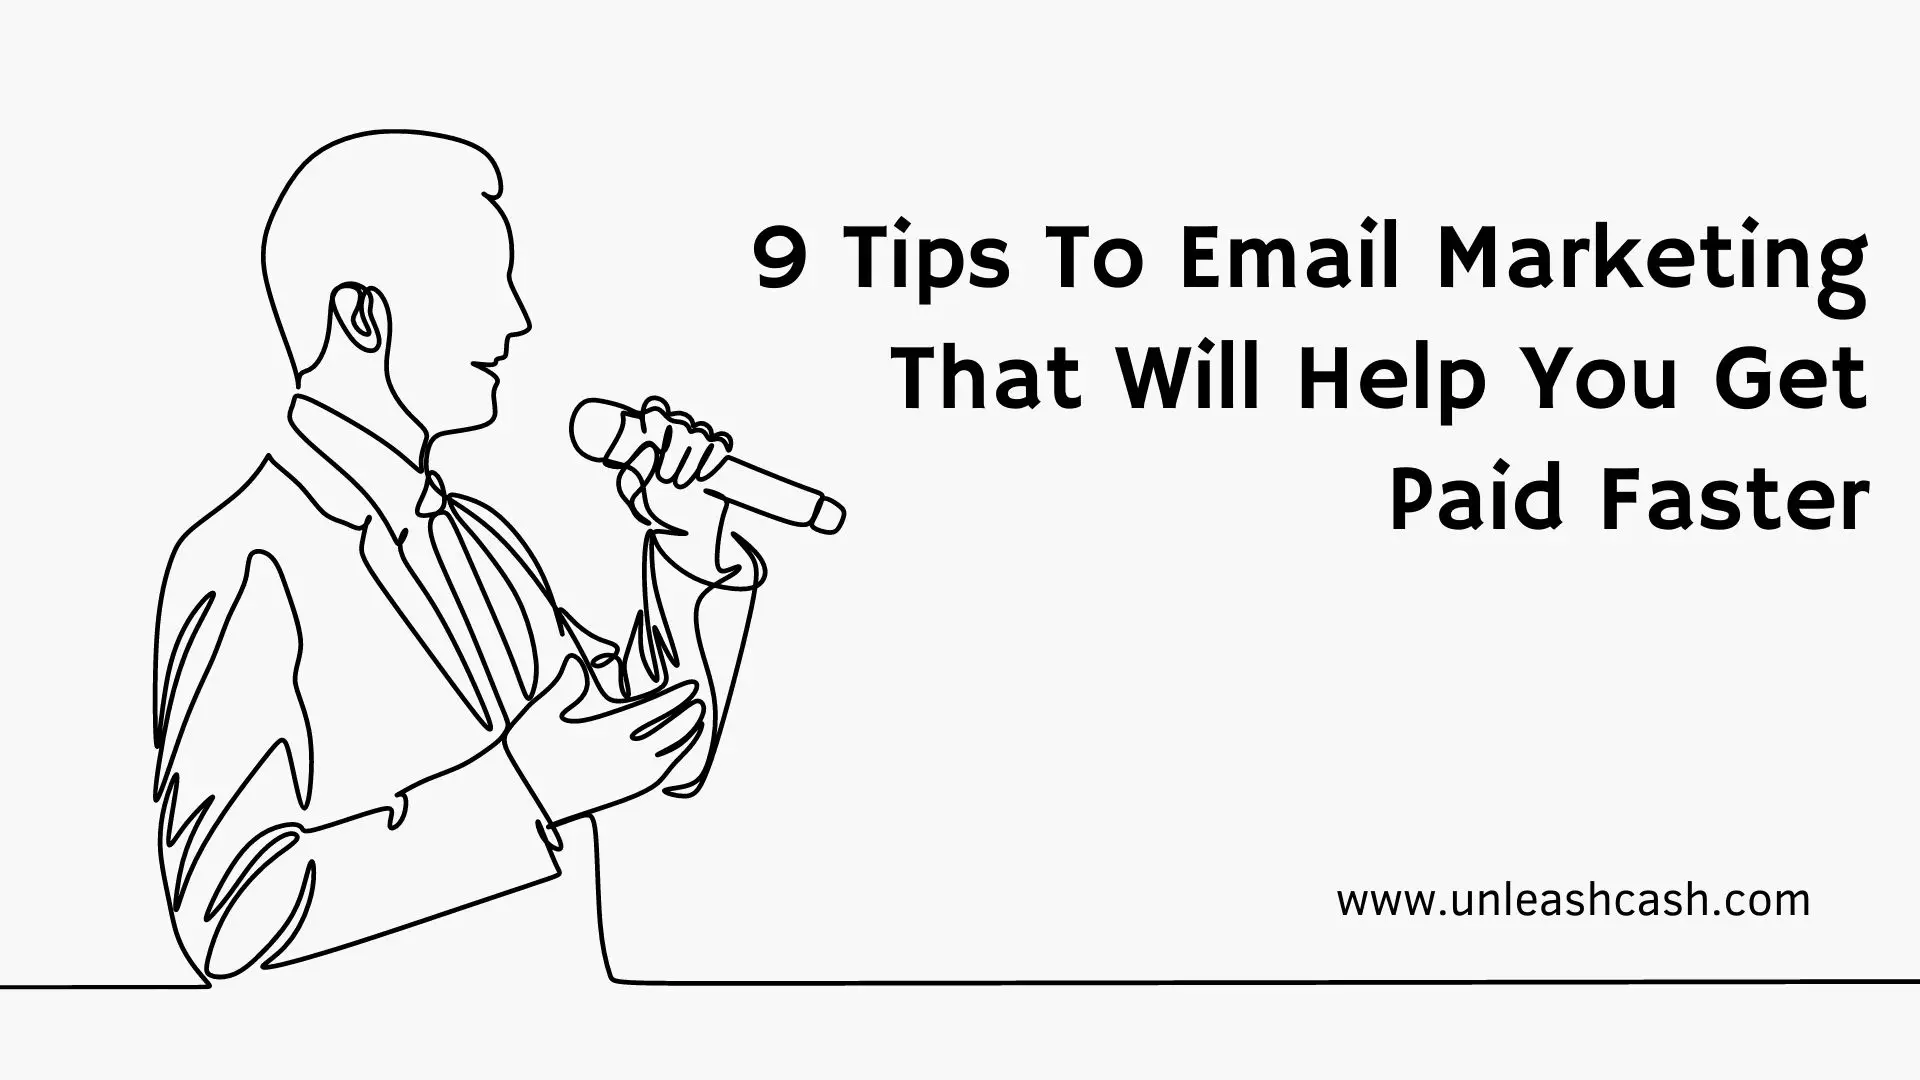 9 Tips To Email Marketing That Will Help You Get Paid Faster